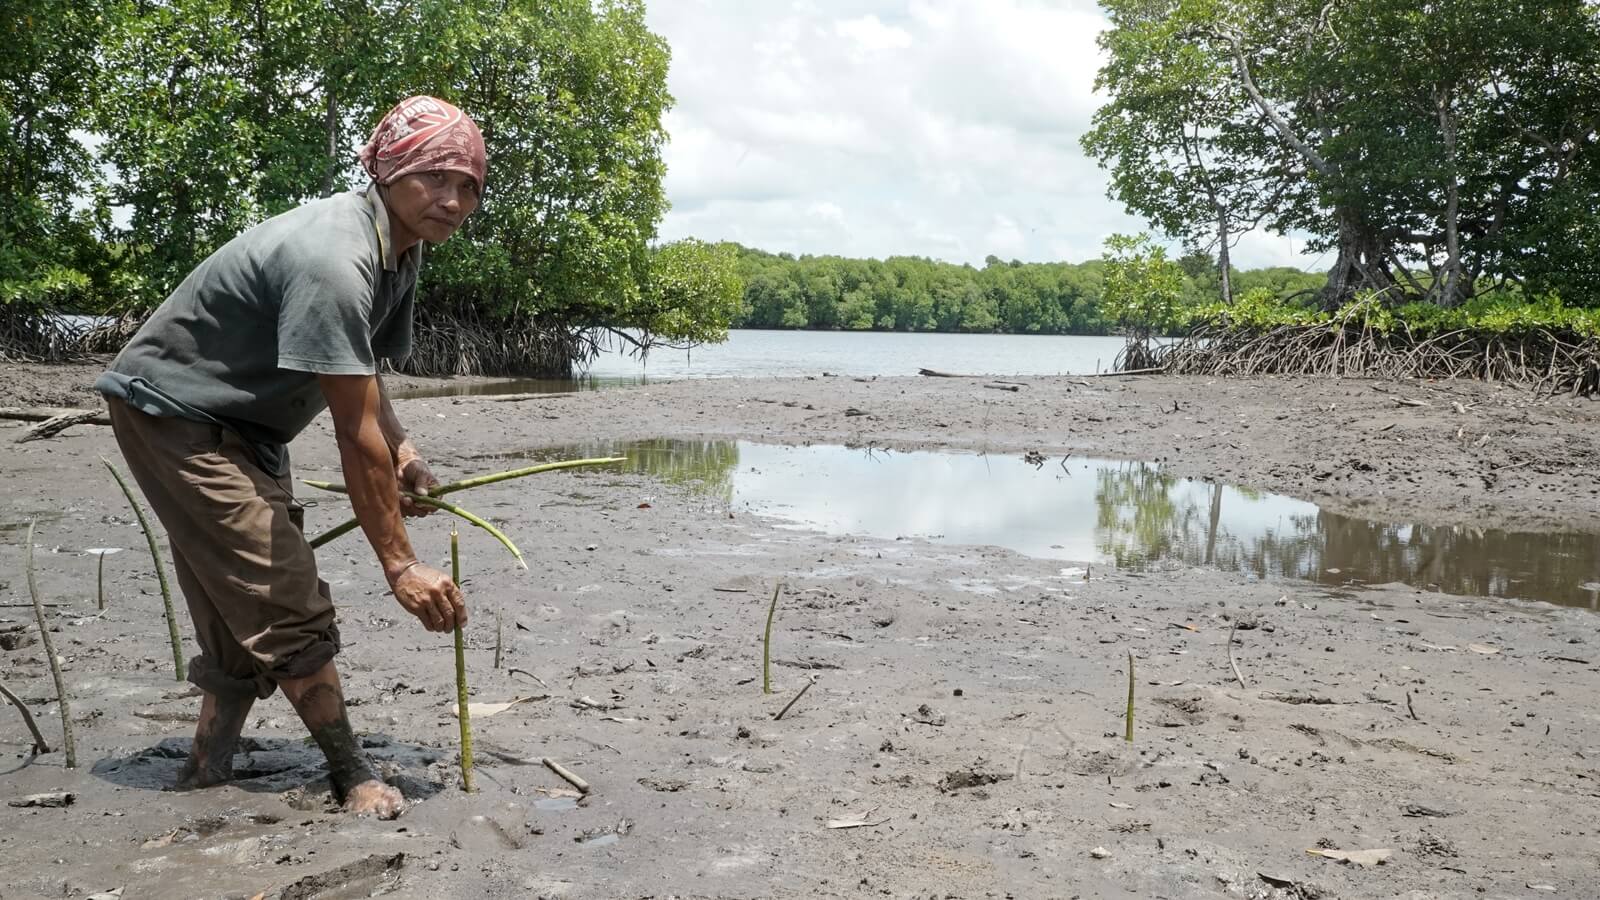 “There are areas that have been destroyed by the [shrimp farm] company that can’t be reforested, seeing that it was excavated so deeply and flooded so badly, and became a swamp. No plants can survive. We are villagers with many limitations. But we will not give up on rehabilitating the area naturally. Will will defend the 1,000 acres mangrove forests in the middle of six villages, the G6. It shouldn’t be destroyed or taken by the company but given to the six villages to be passed down from this generation to the next.” - Mastupang Somoi, 58